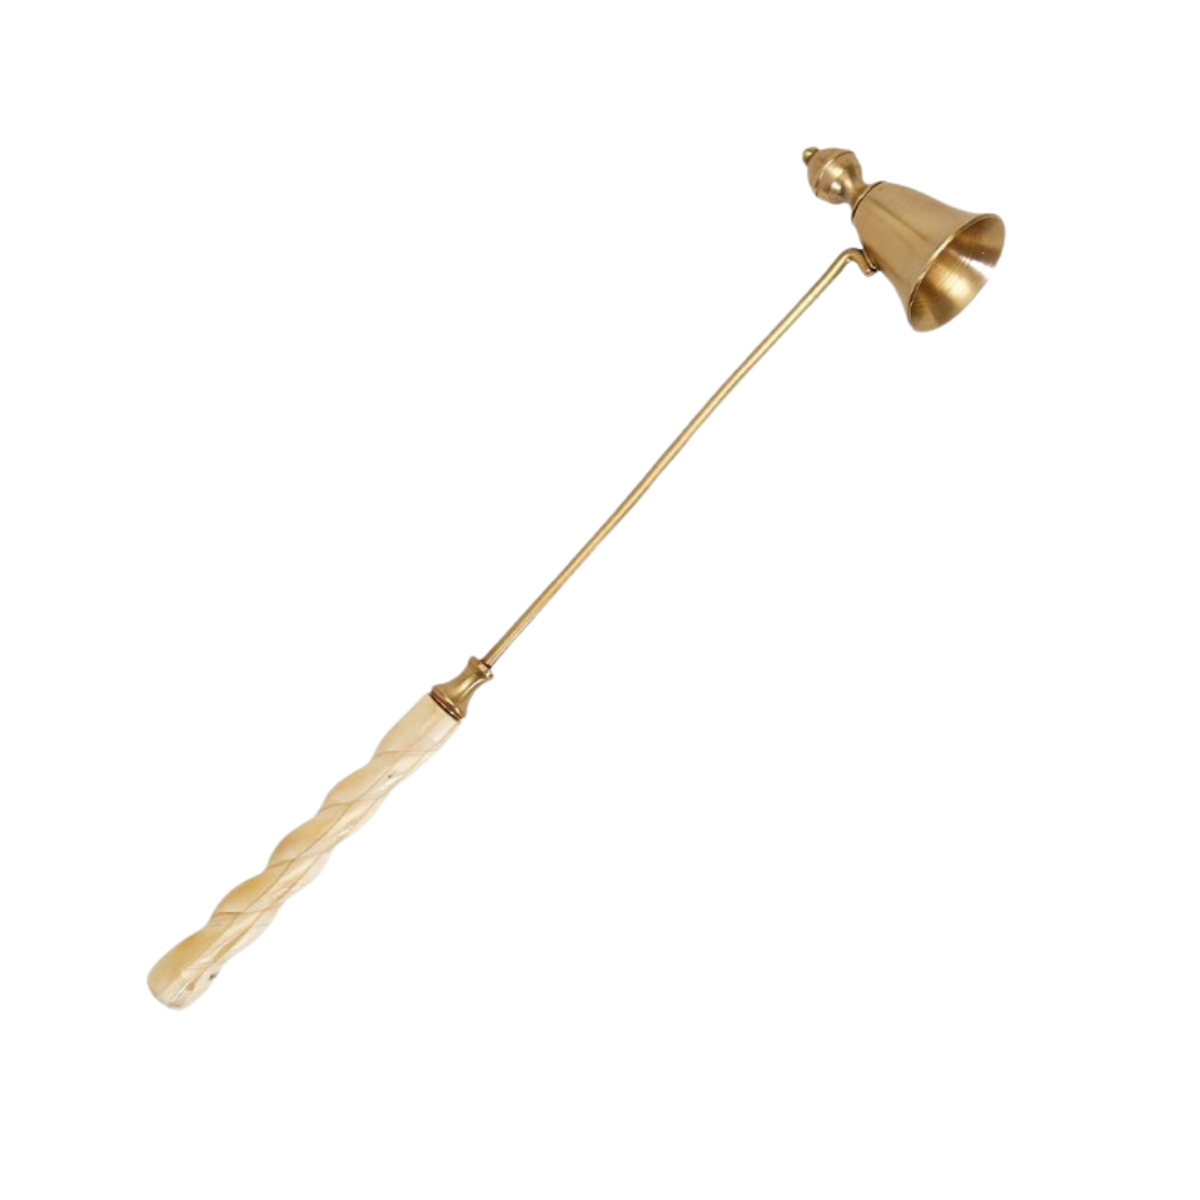 Antiqued Brass Candle Snuffer